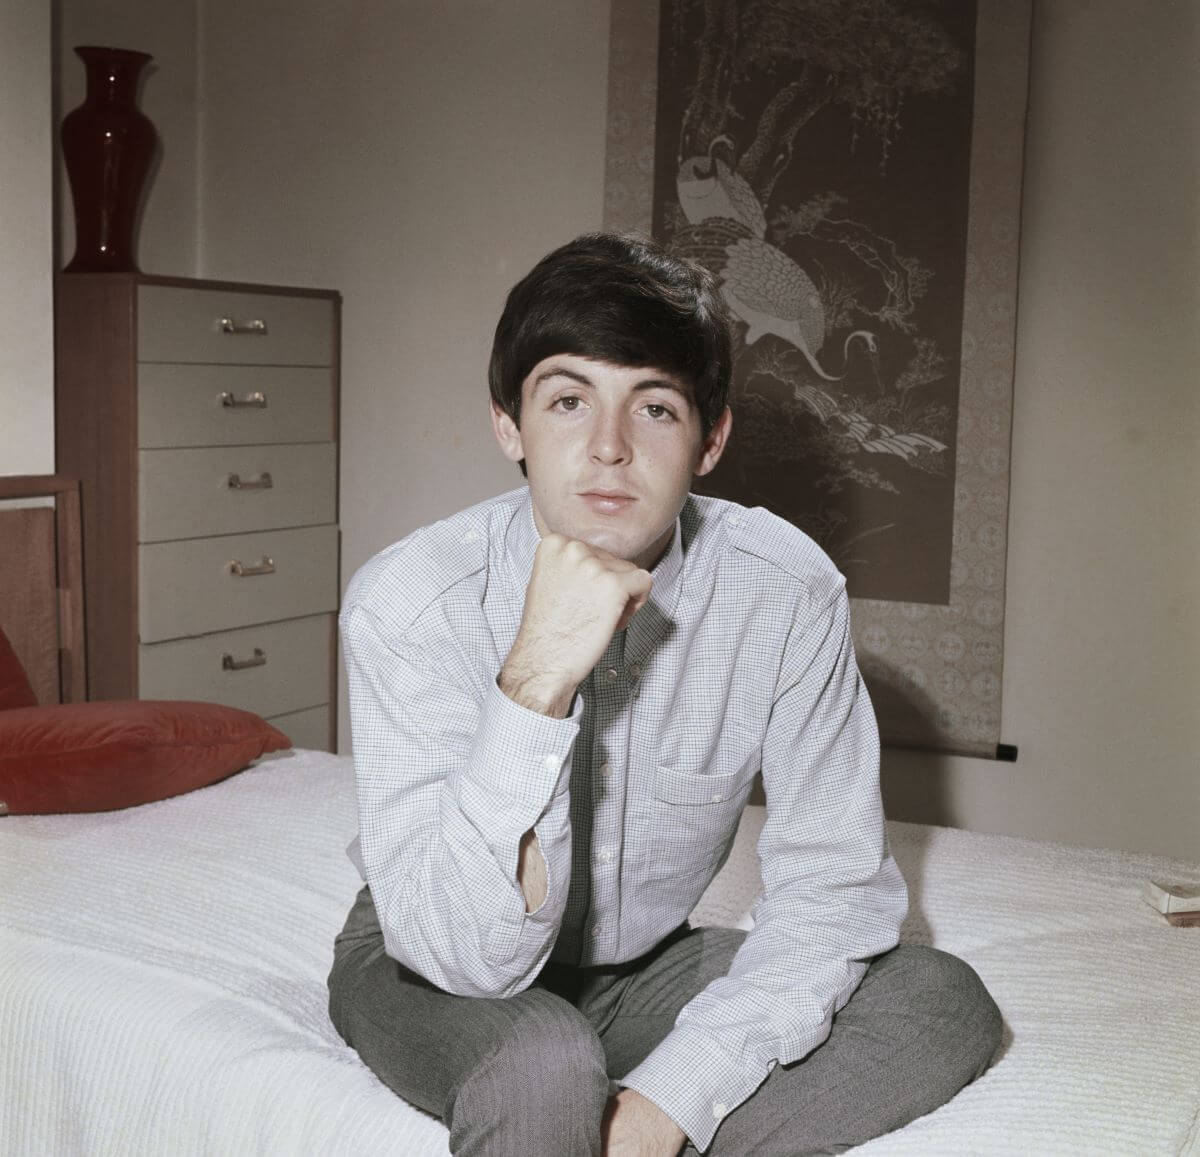 Paul McCartney sits on a bed and rests his chin on his fist.